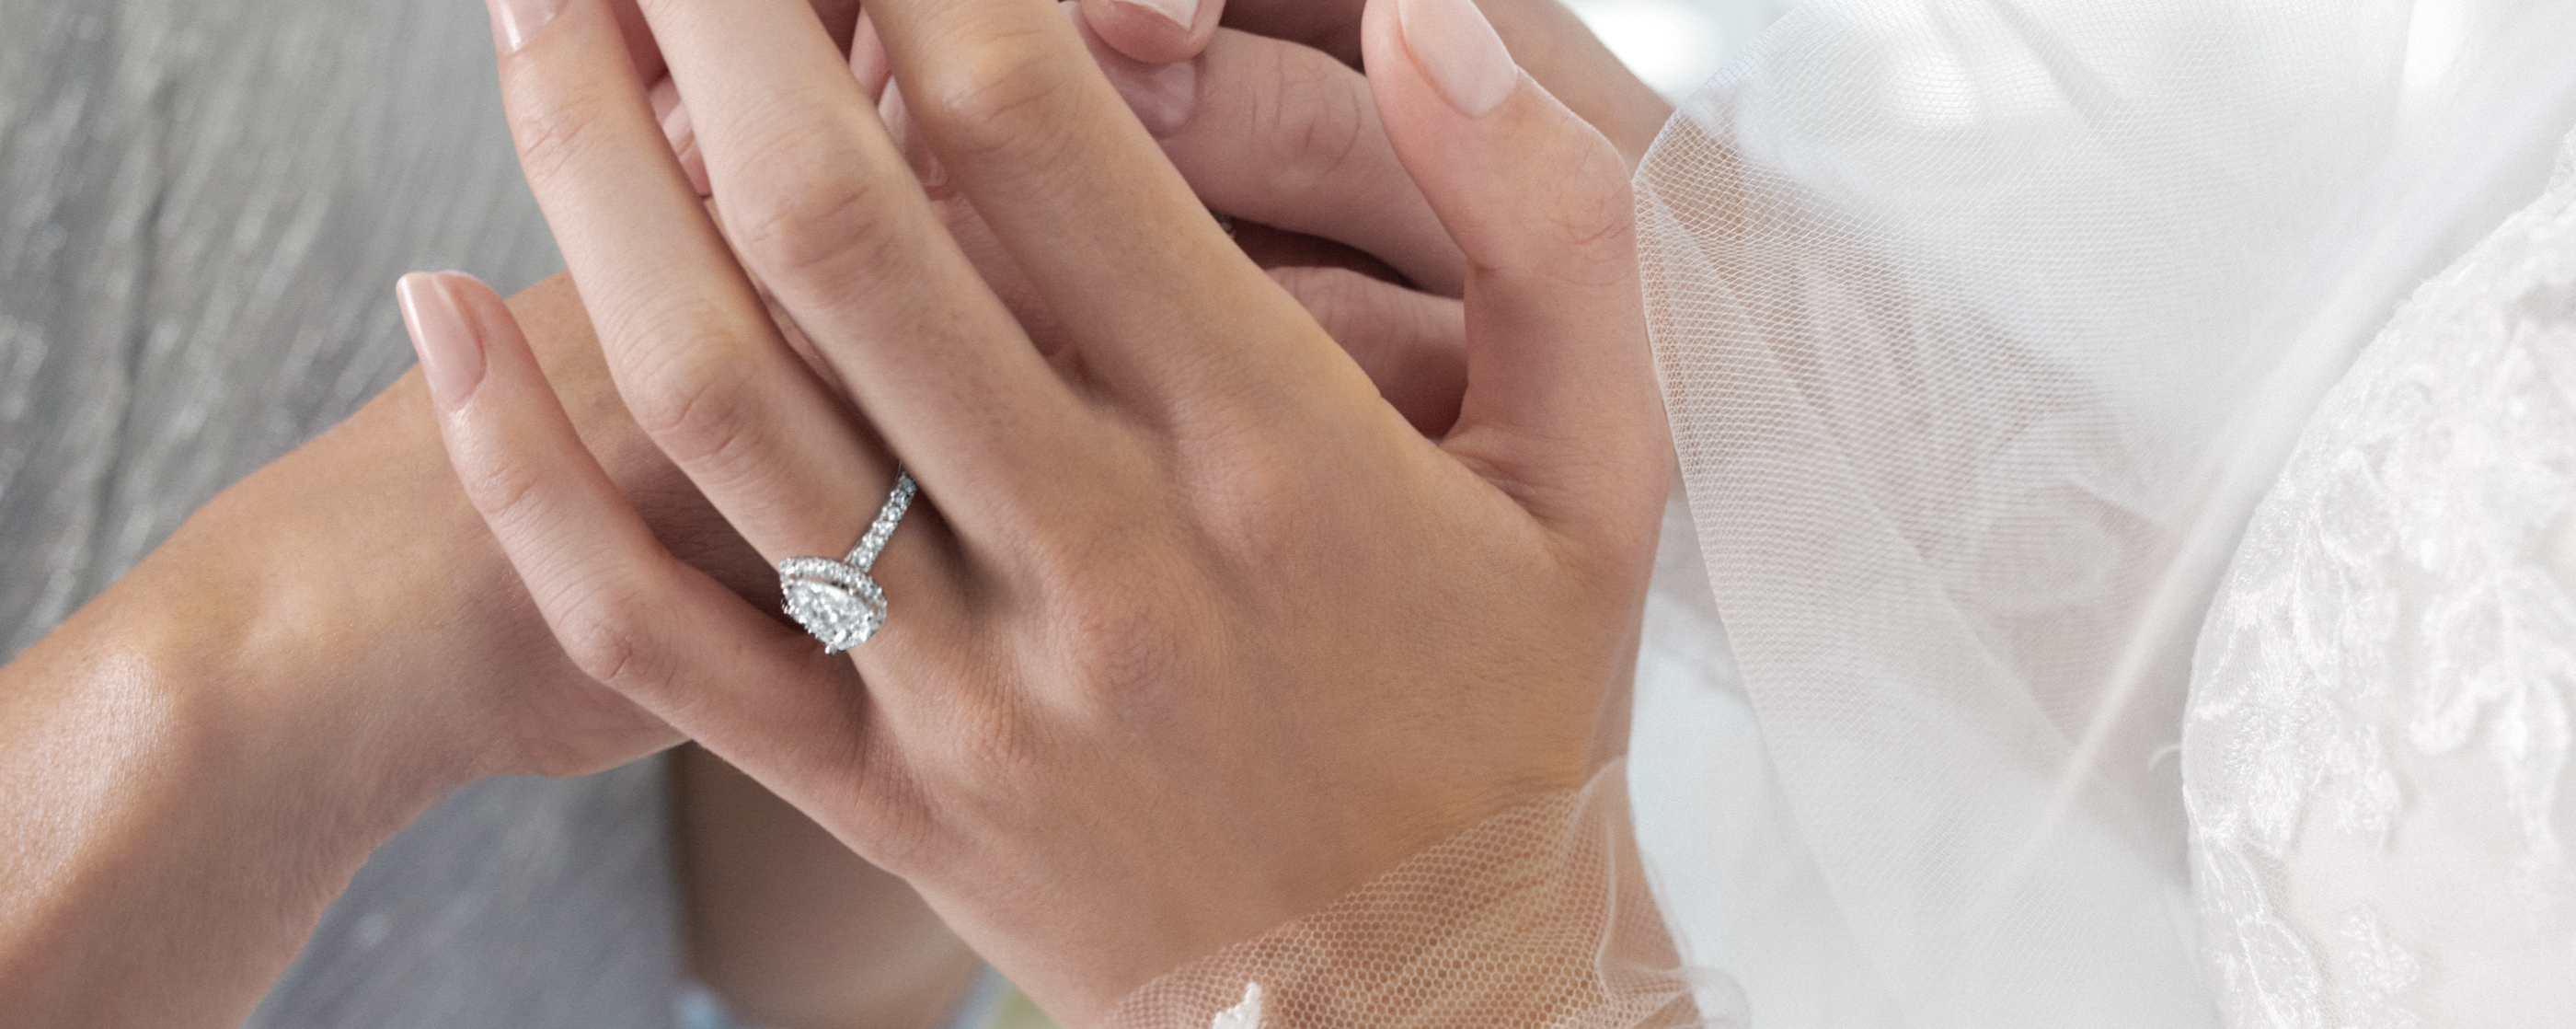 Closeup of a diamond engagement ring on a brides hand